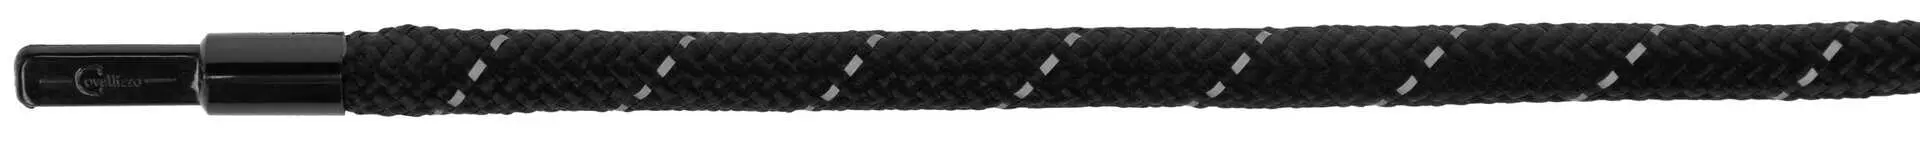 Lead Rope Reflective black/silver, Snap Hook